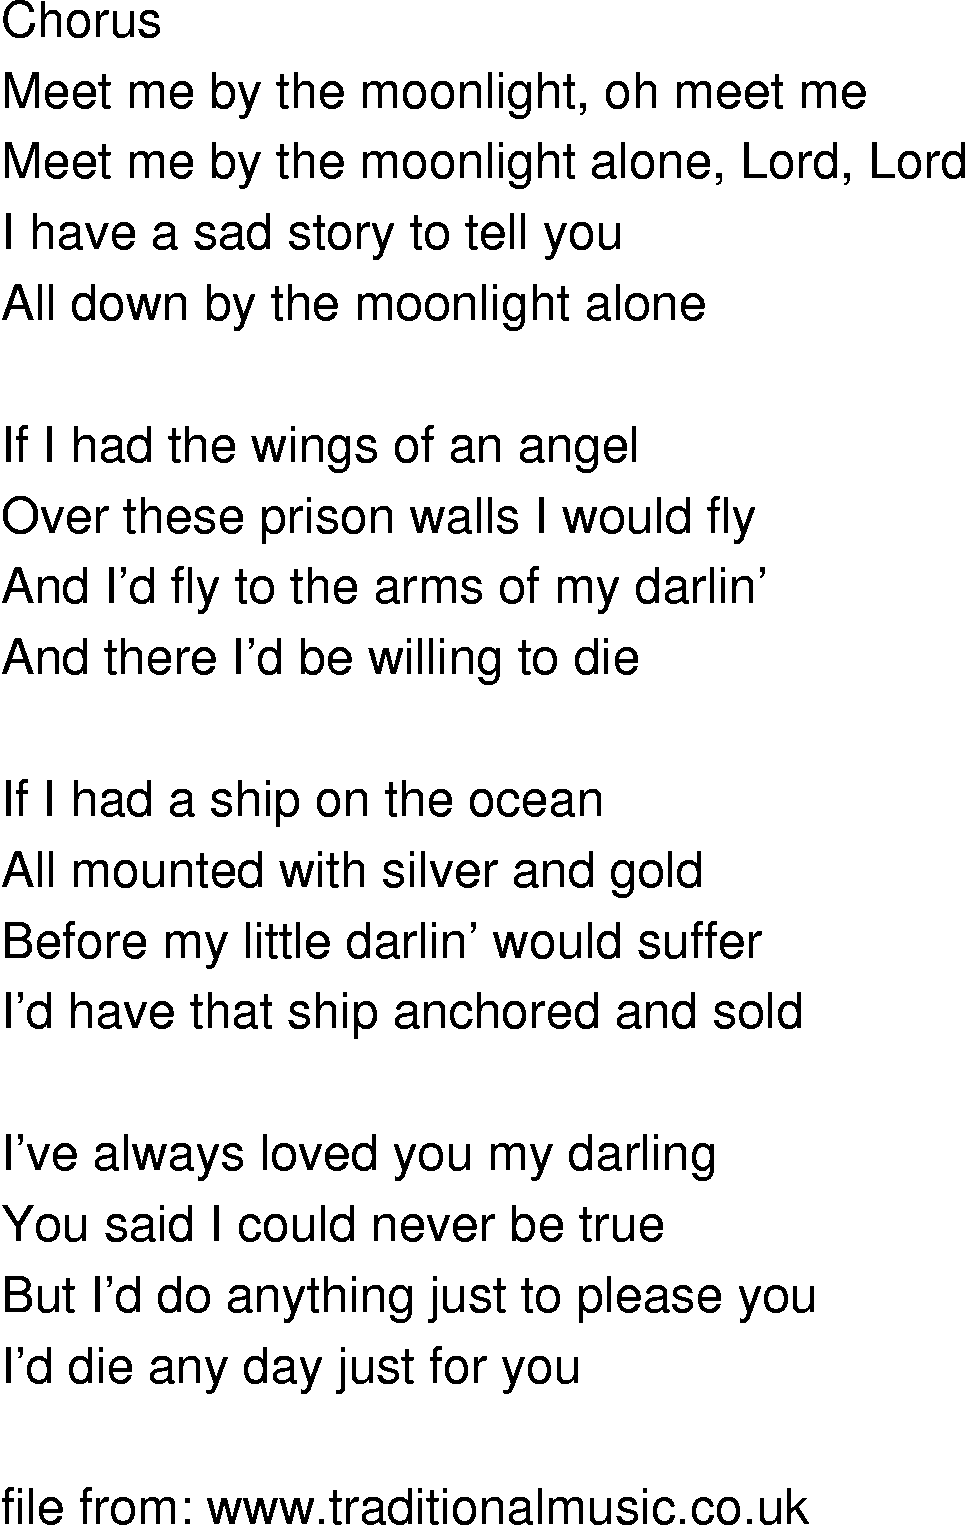 Old-Time (oldtimey) Song Lyrics - meet me by the moonlight